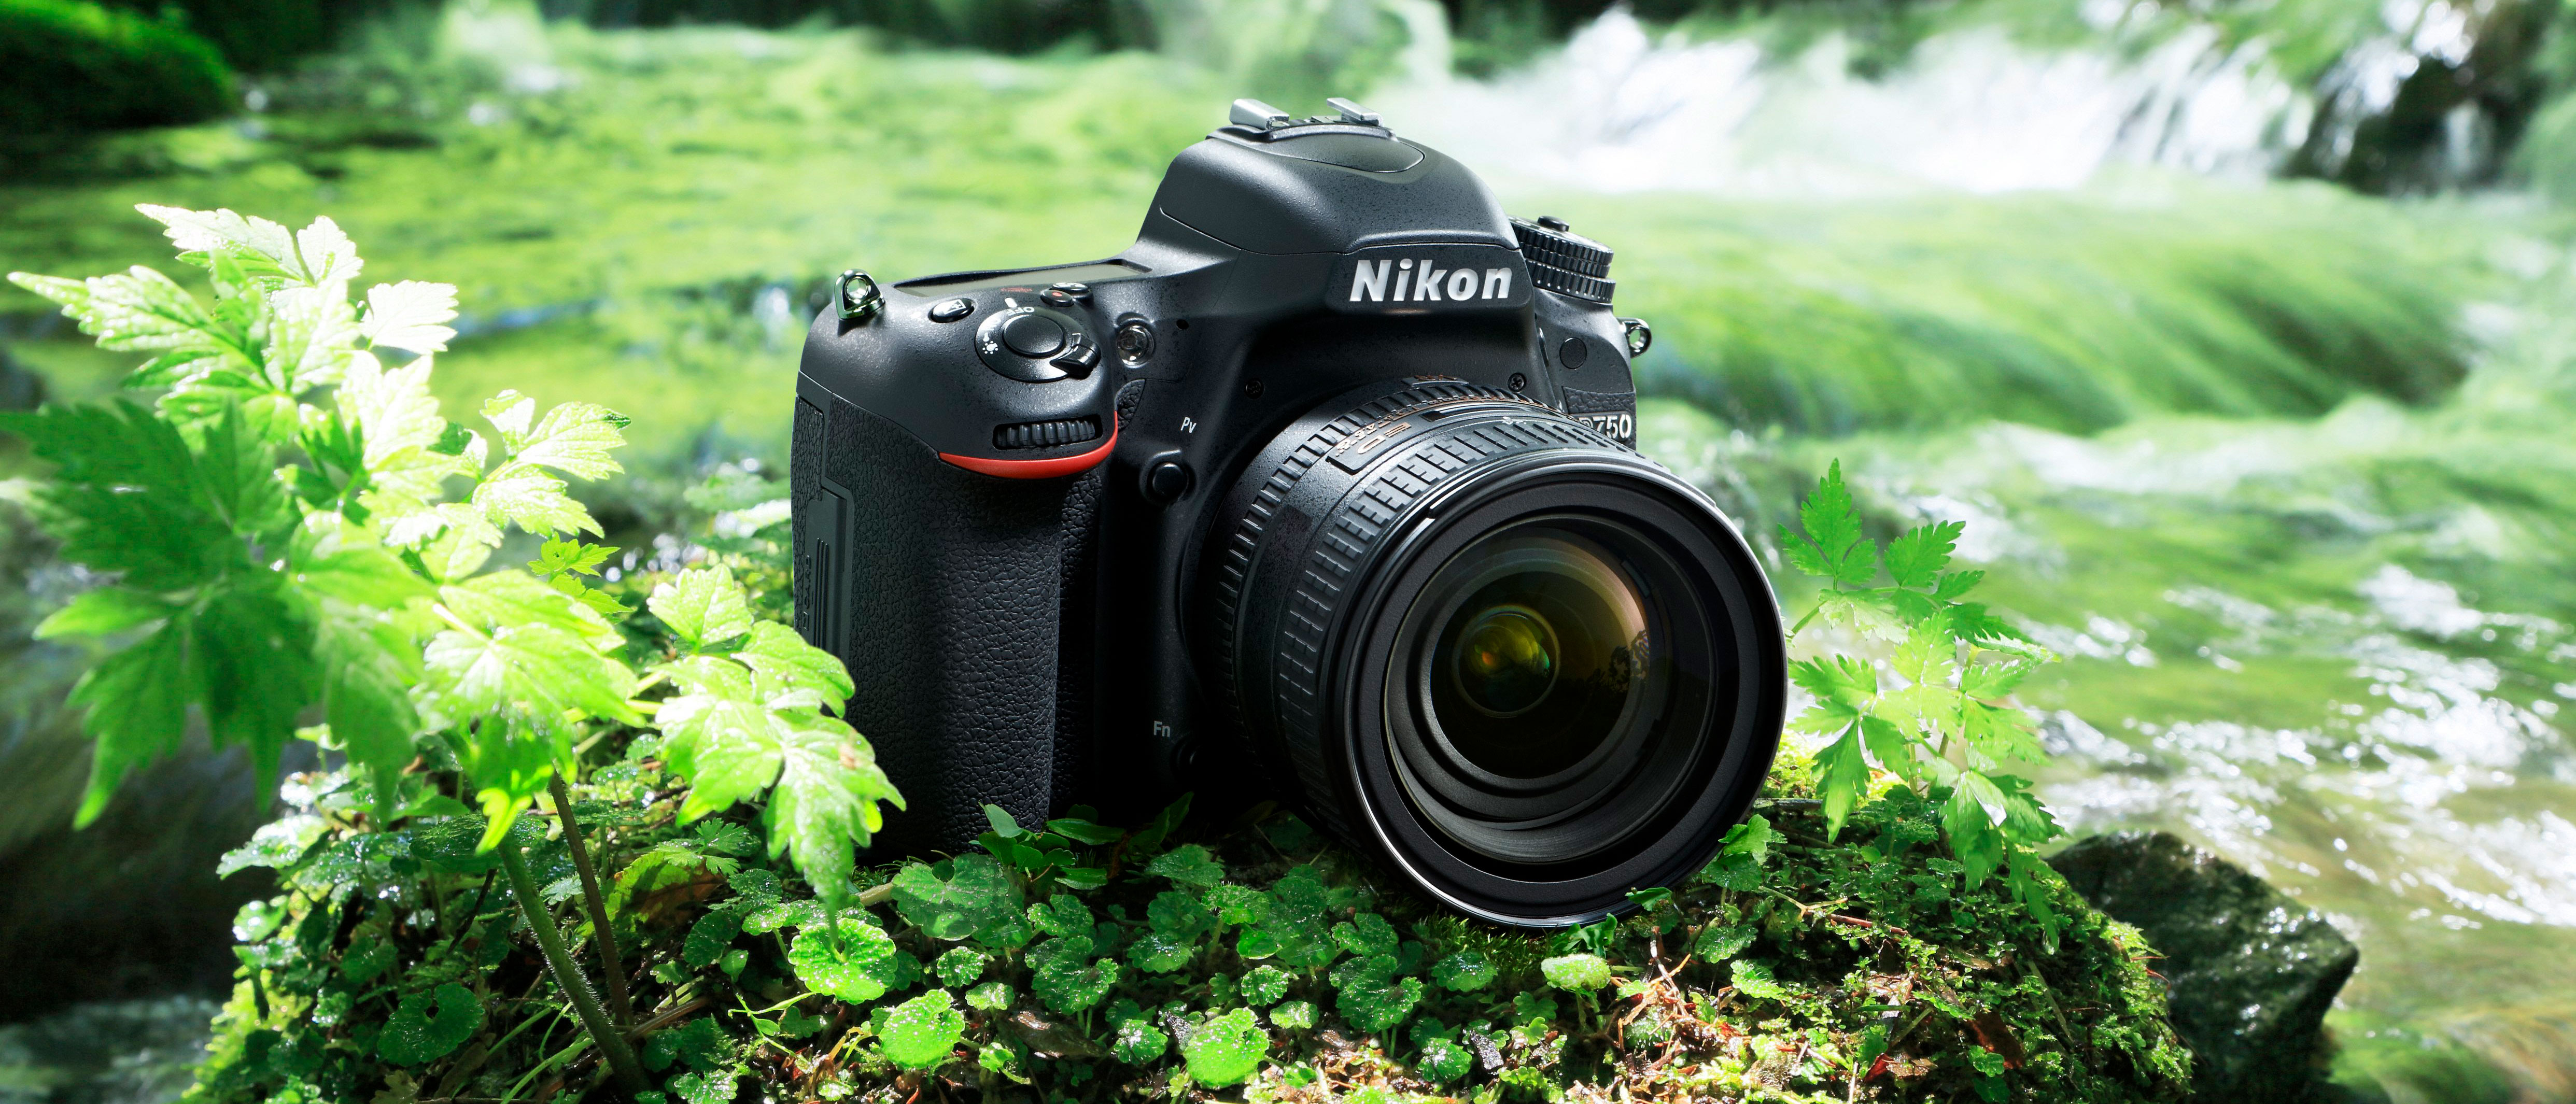 Nikon D750 review: The best camera released in 2014 - India Today